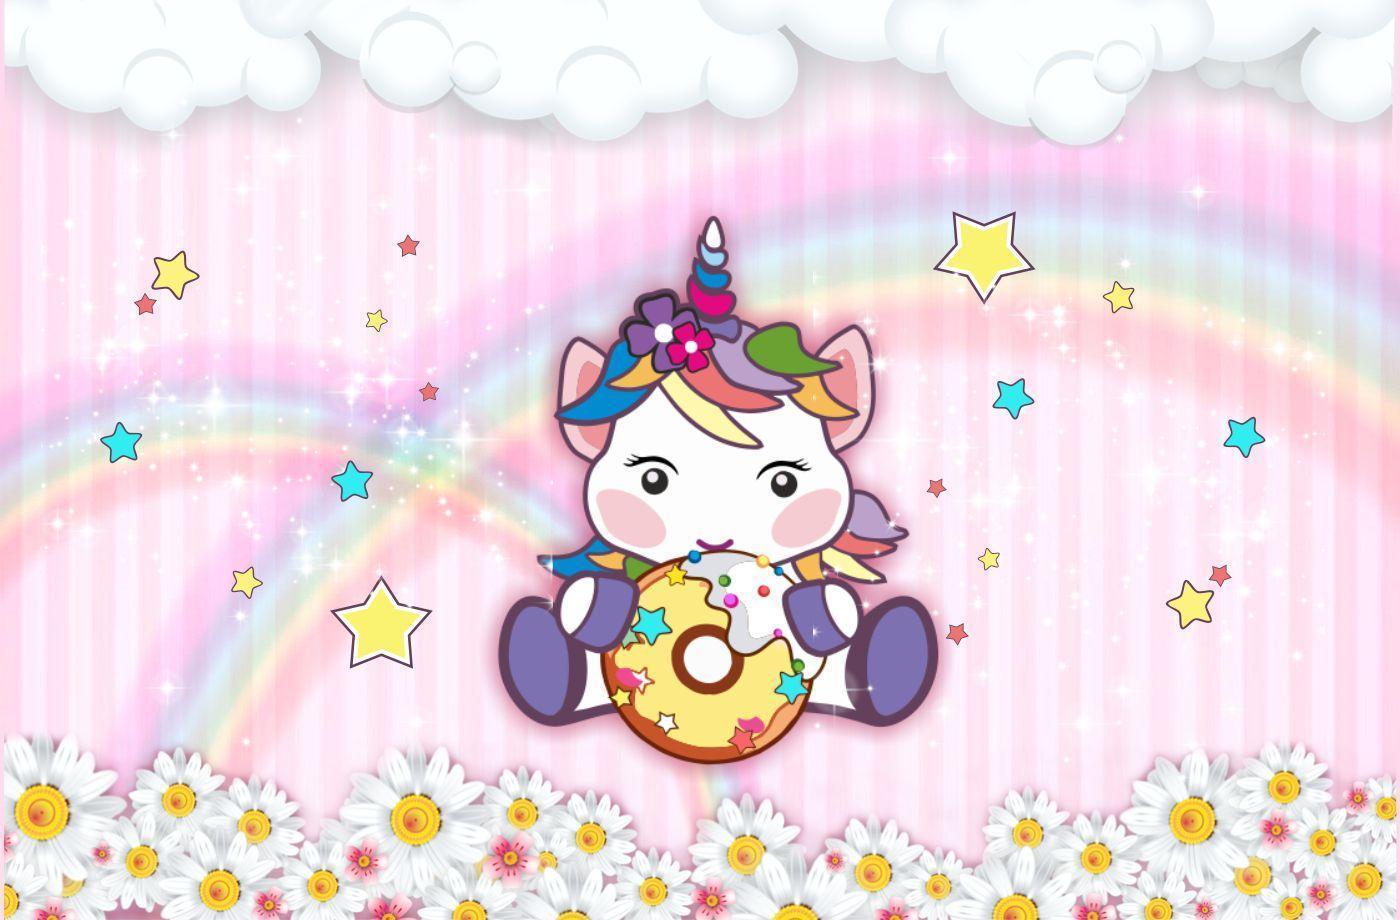 Cute Unicorn Shelly Kawaii Live wallpaper for Android